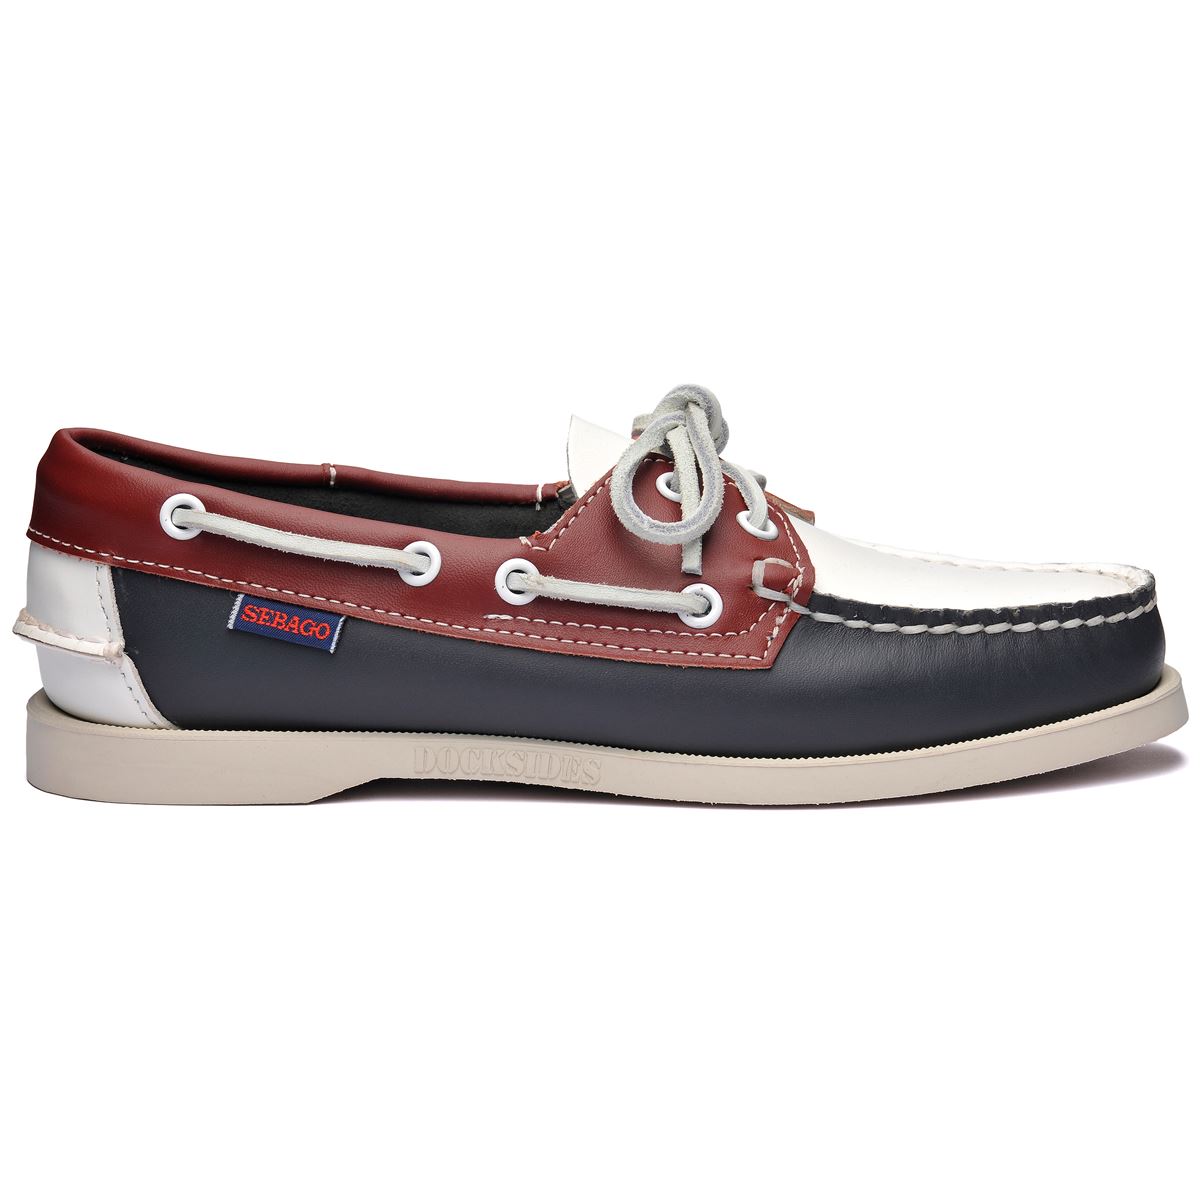 Portland Spinnaker Woman - Navy & Red & White